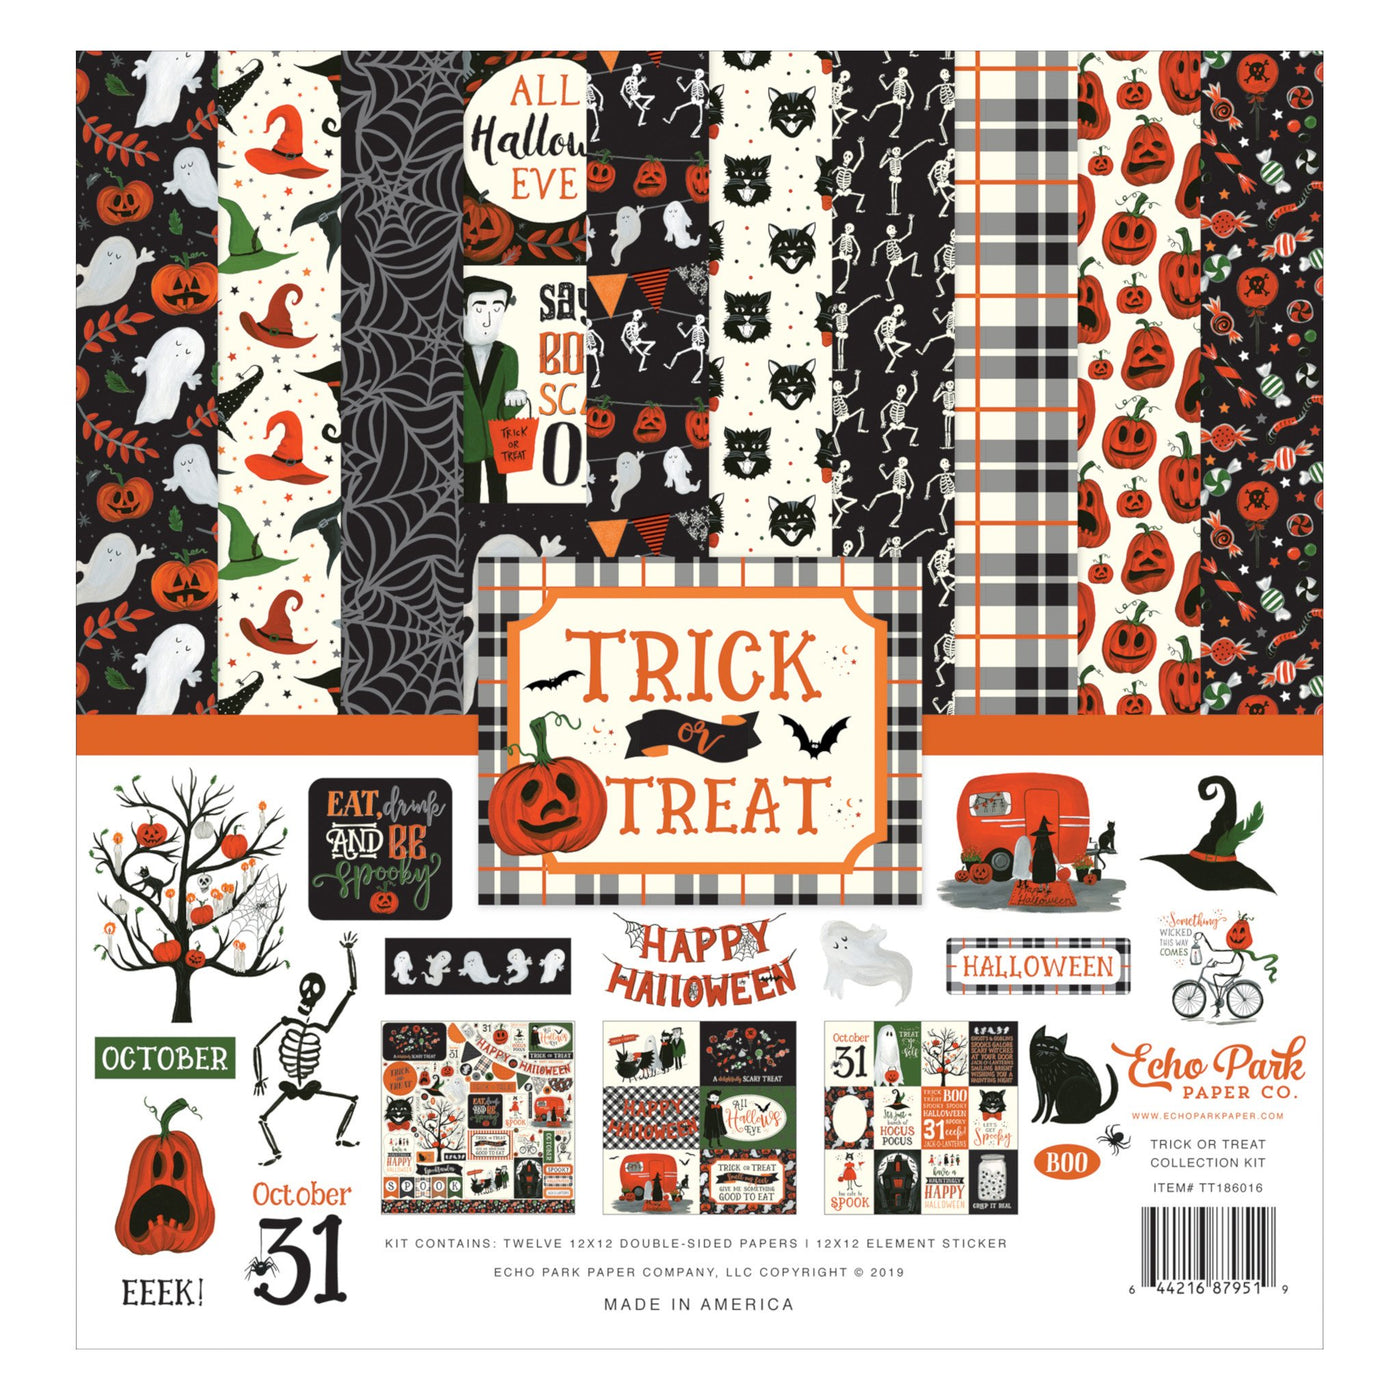 Trick or Treat Collection Kit by Echo Park Paper includes 12 unique sheets of double-sided paper with Halloween themes